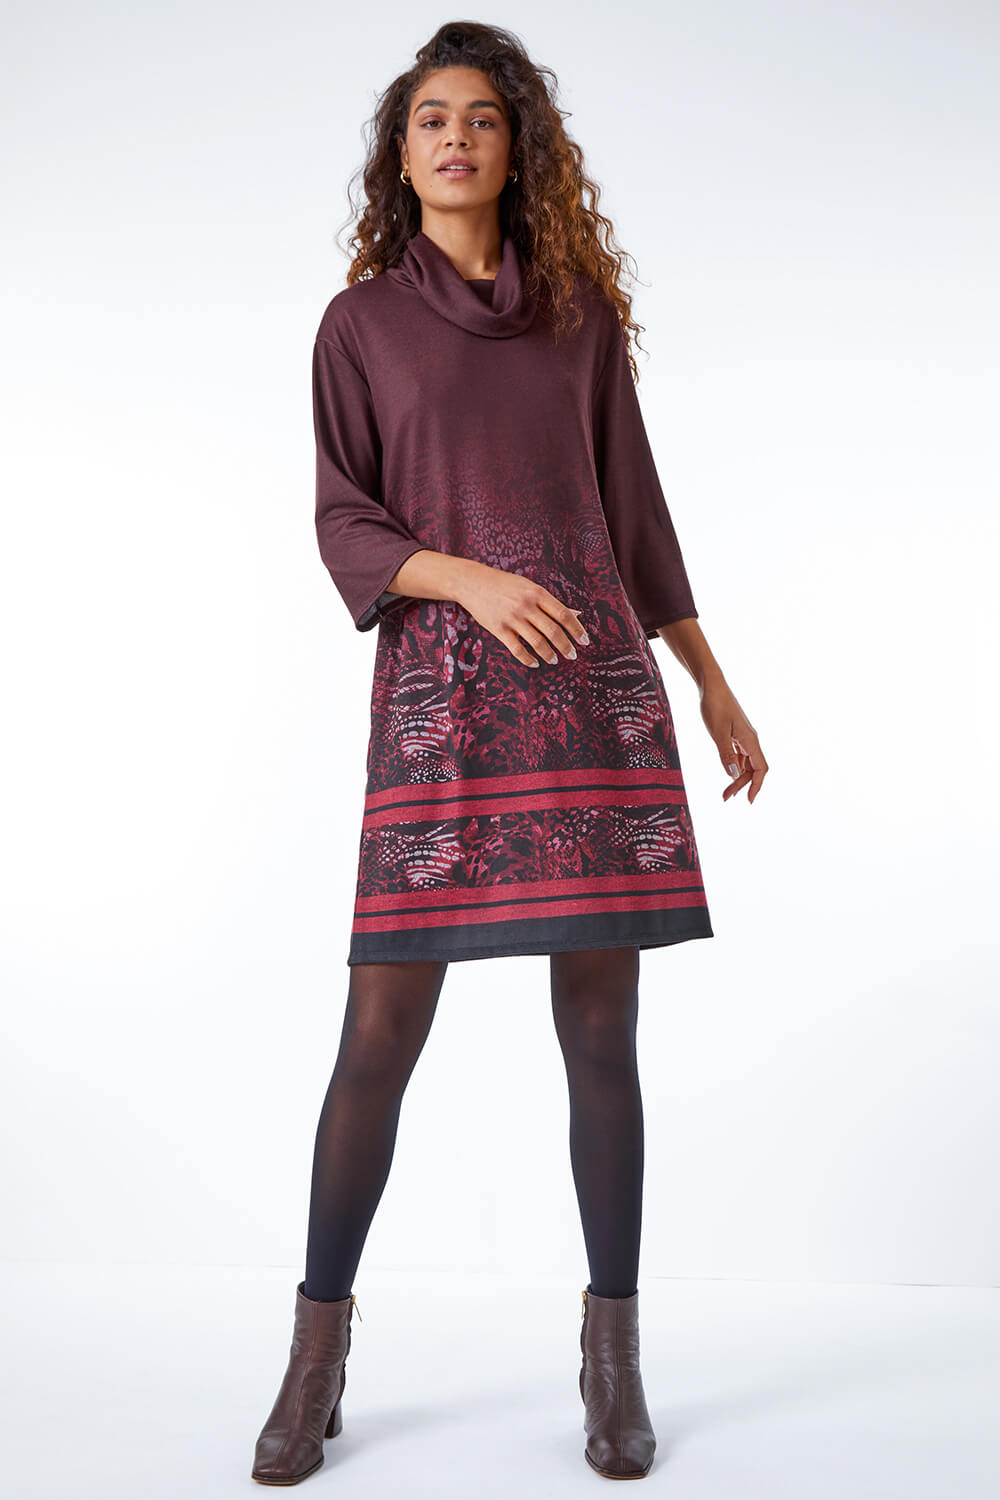 Wine Relaxed Fit Ombre Animal Print Dress, Image 2 of 5